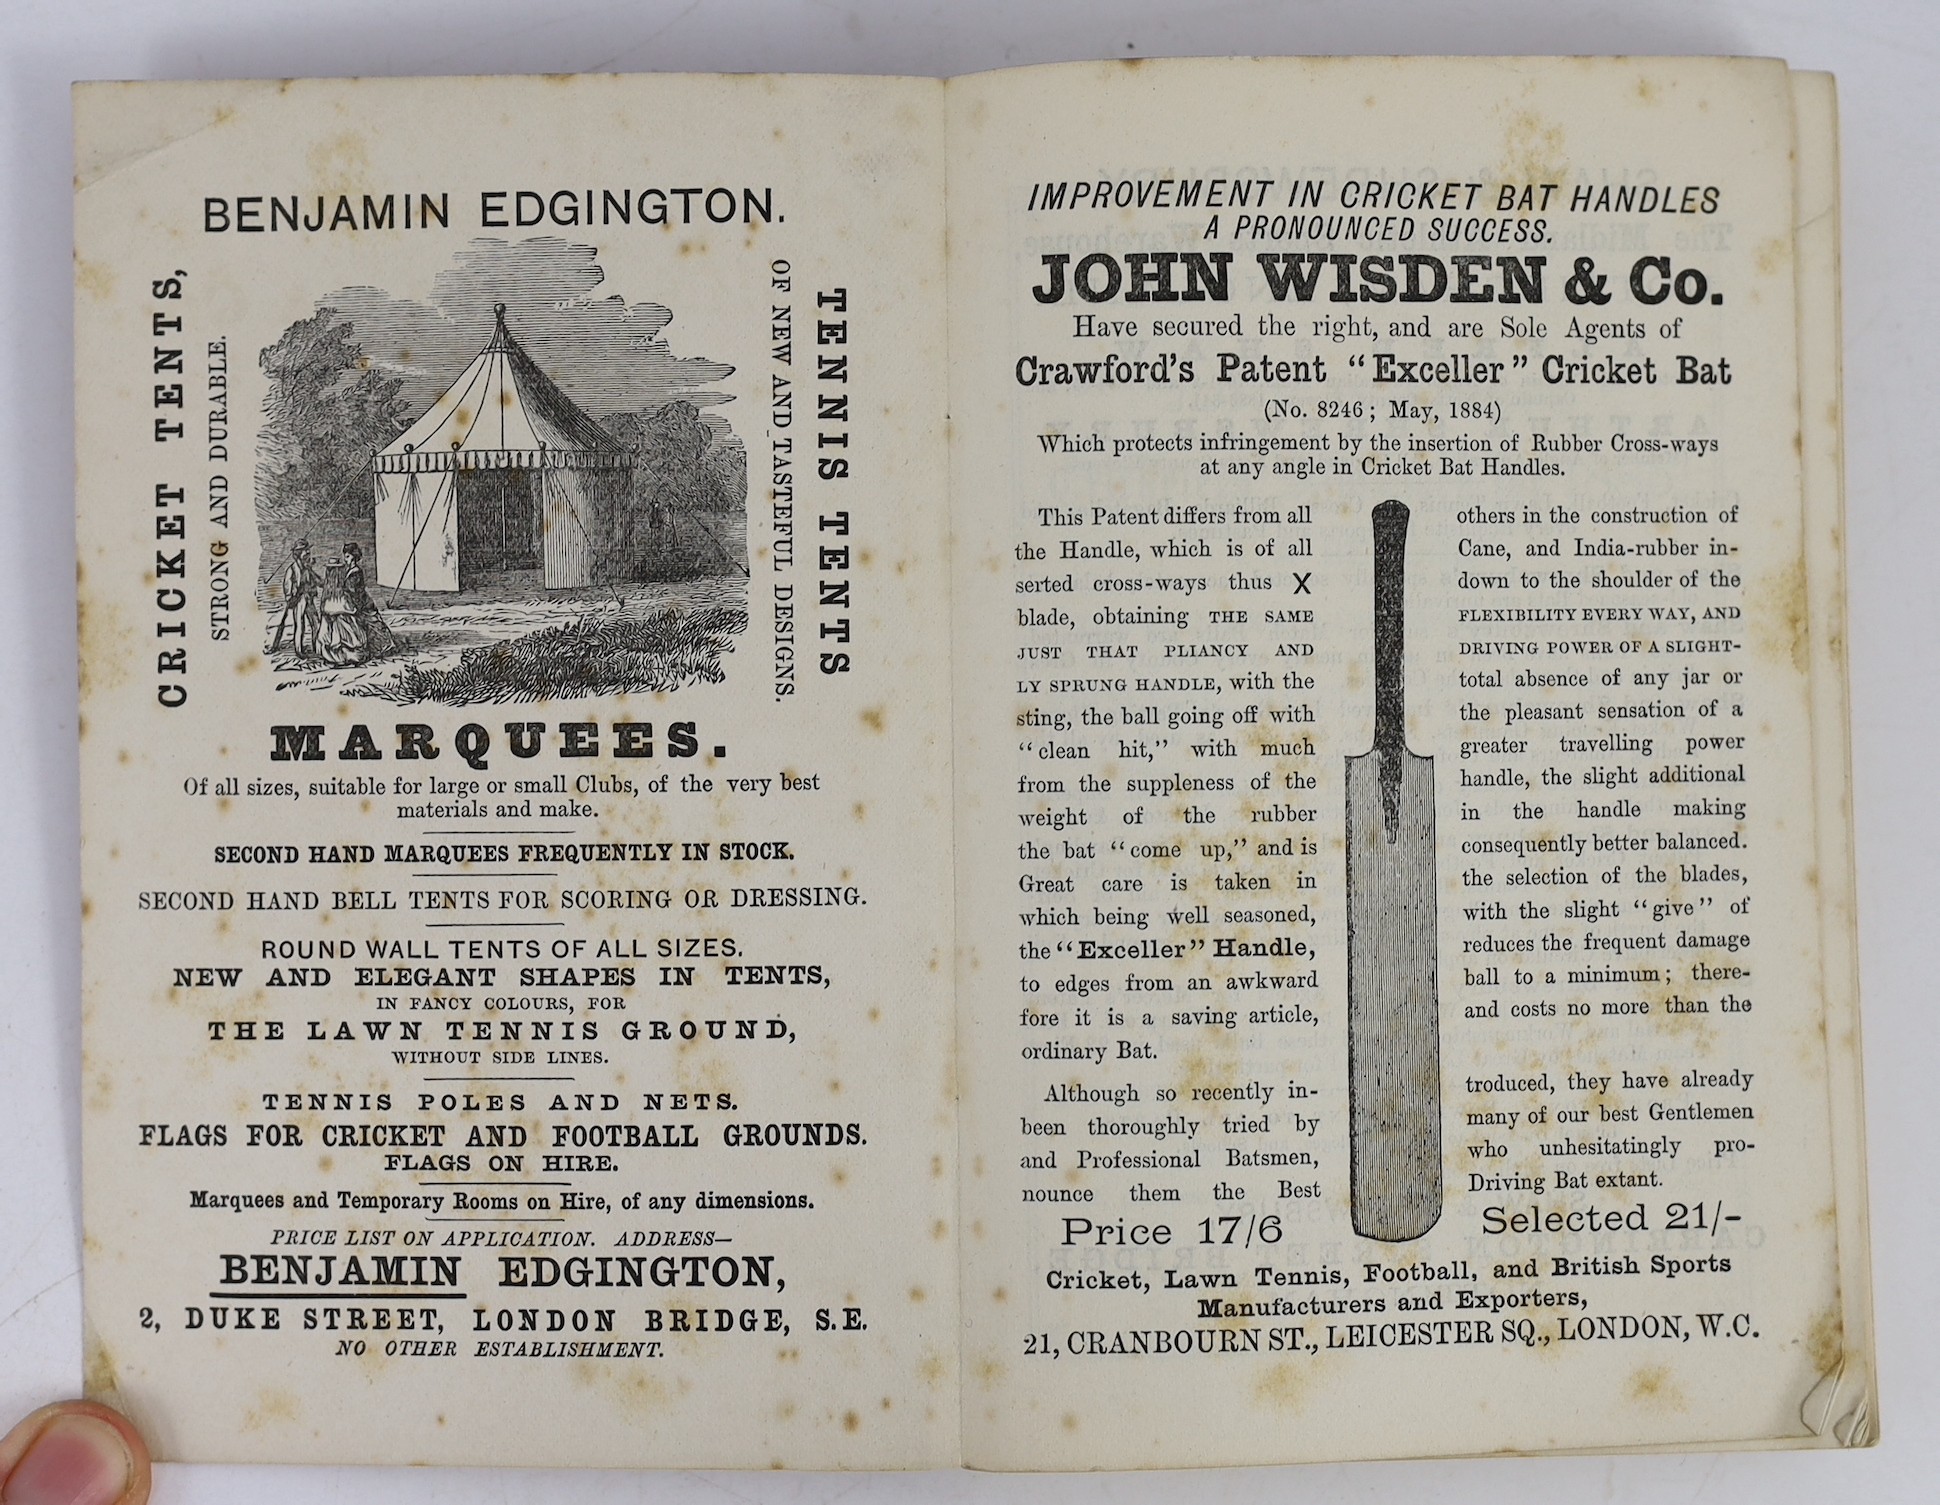 Wisden, John - Cricketers’ Almanack for 1885, 22nd edition, original paper wrappers, 2cm. tear to upper spine, but paper present, spotting to early advertisements, title, page edges and endpapers.